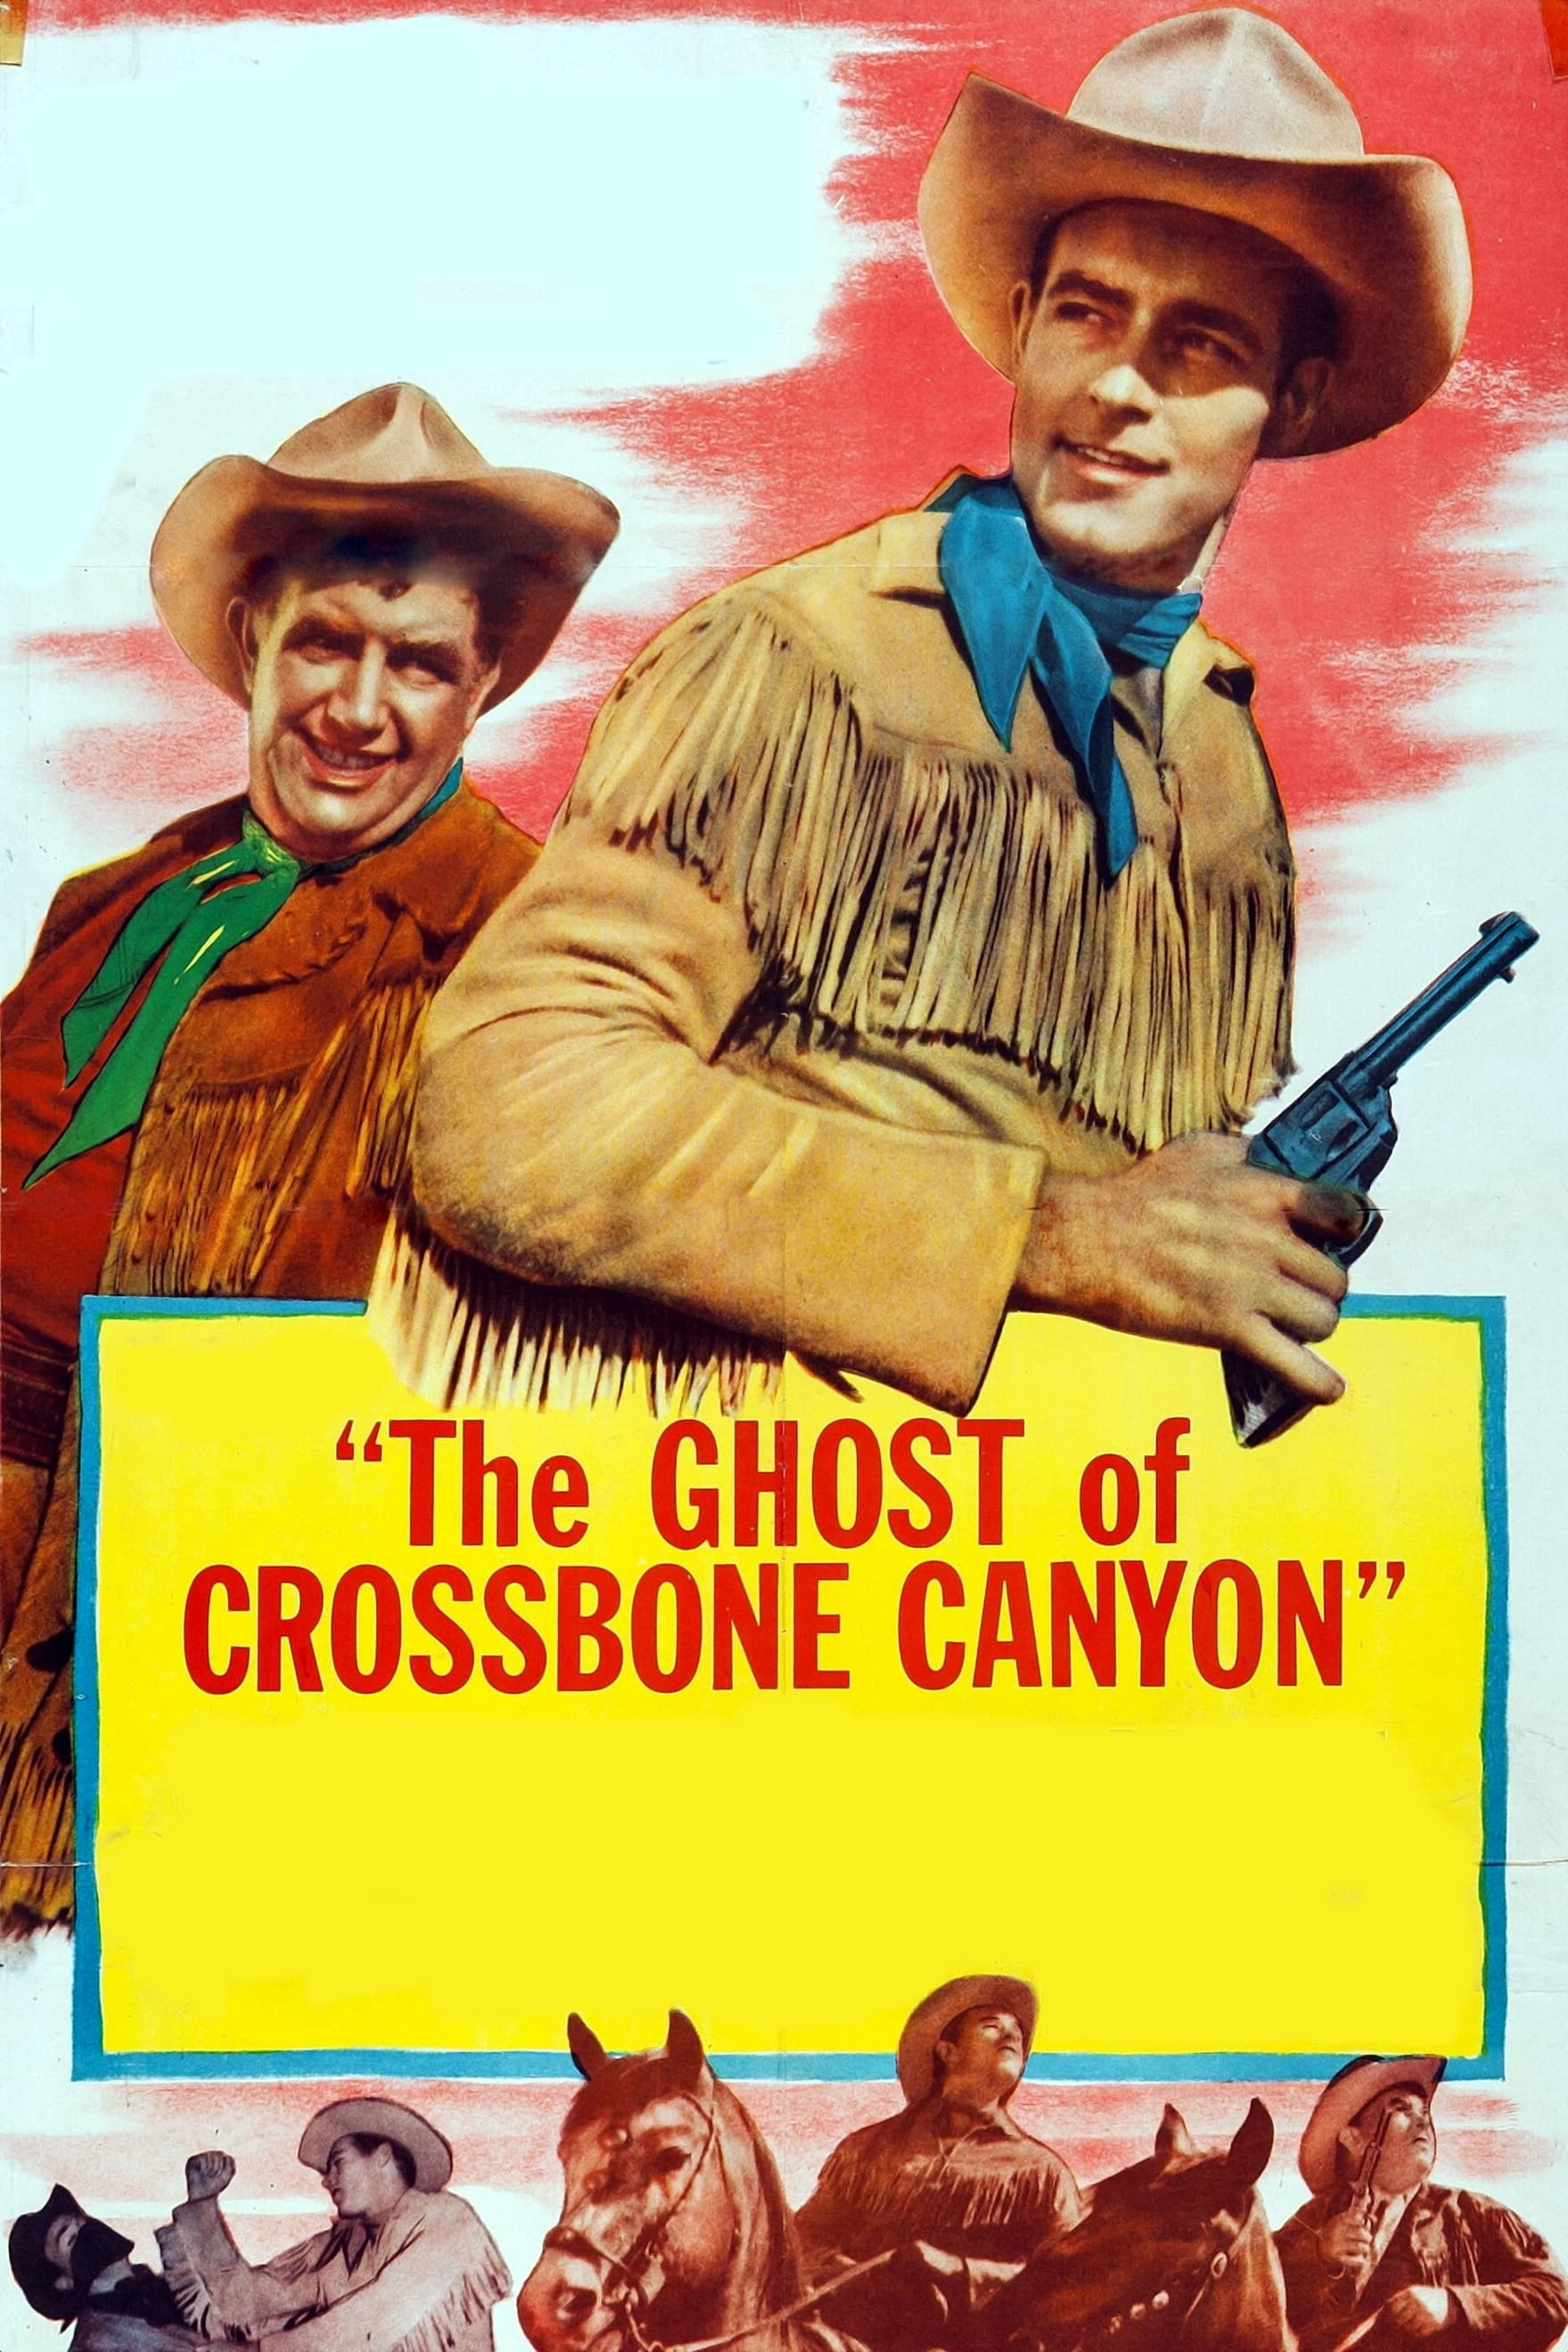 The Ghost of Crossbone Canyon (1952)